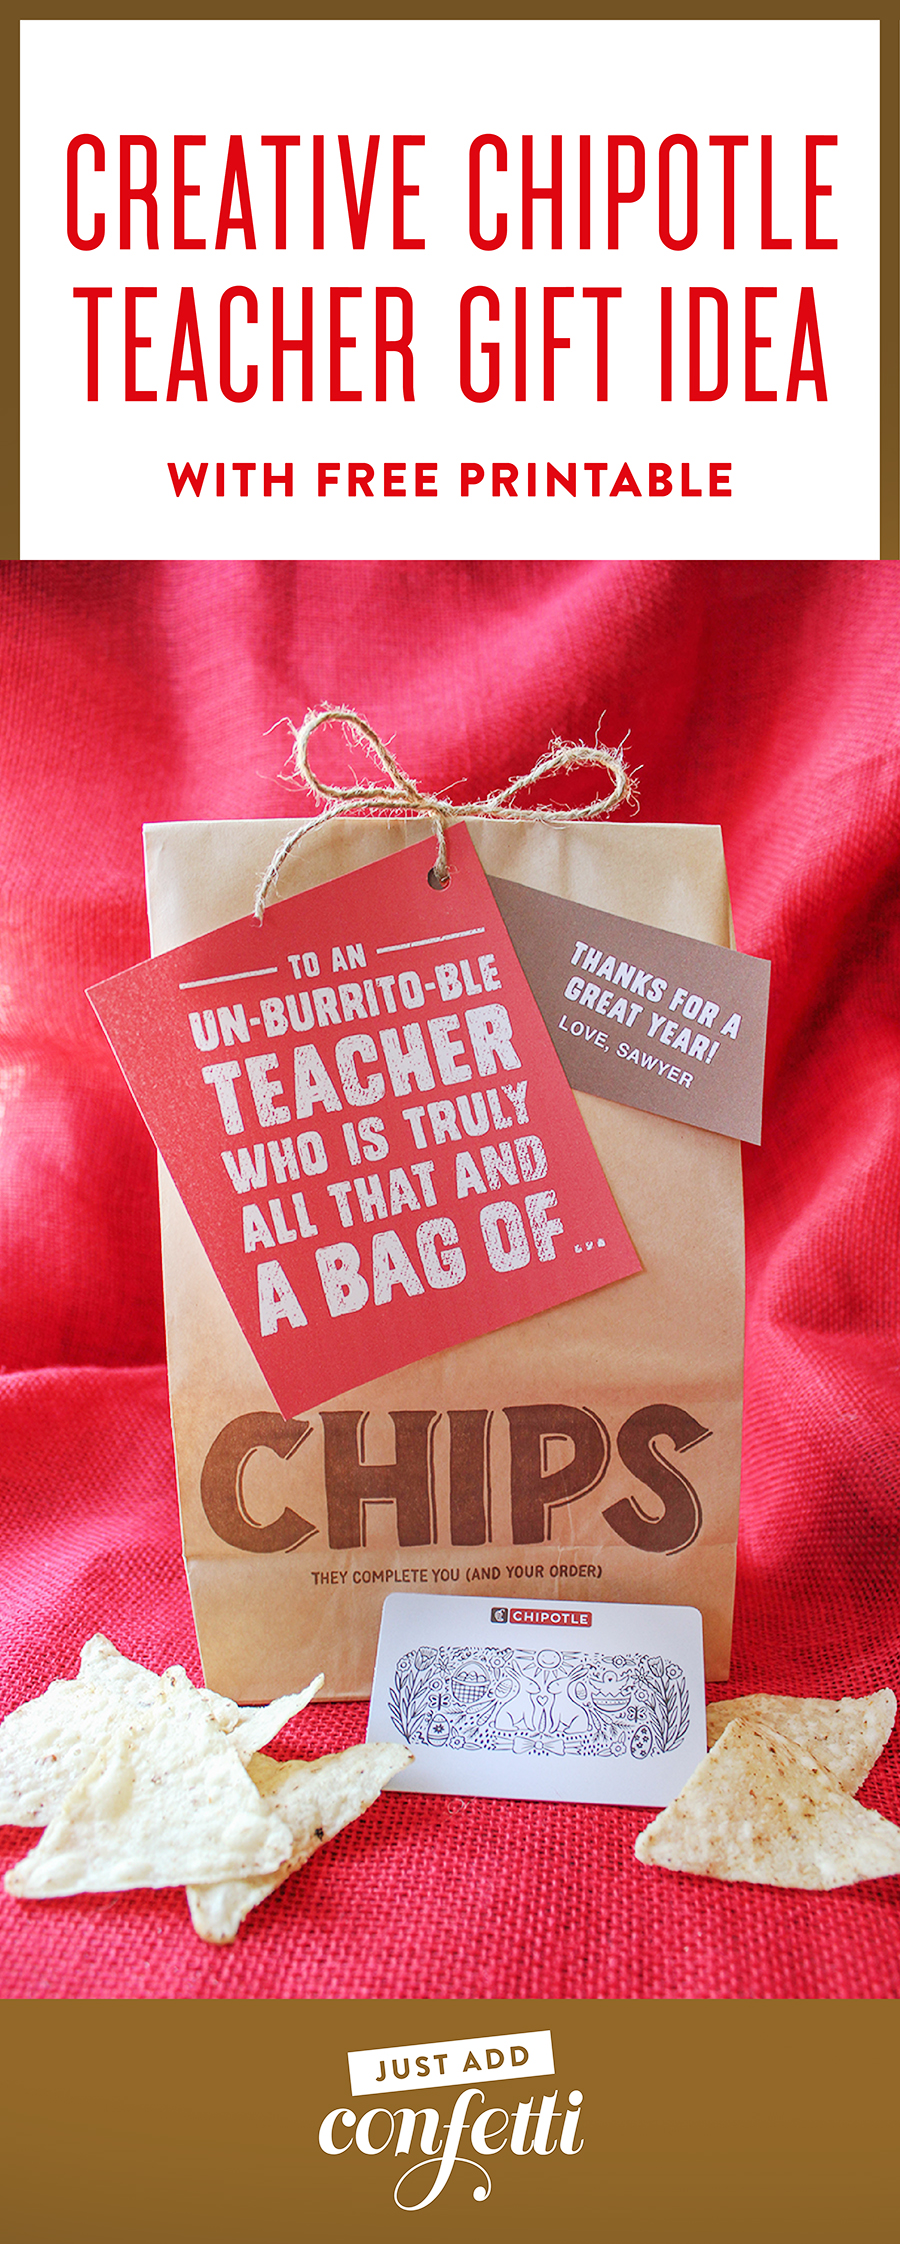 Creative Chipotle Teacher Appreciation Gift Idea, all that and a bag of